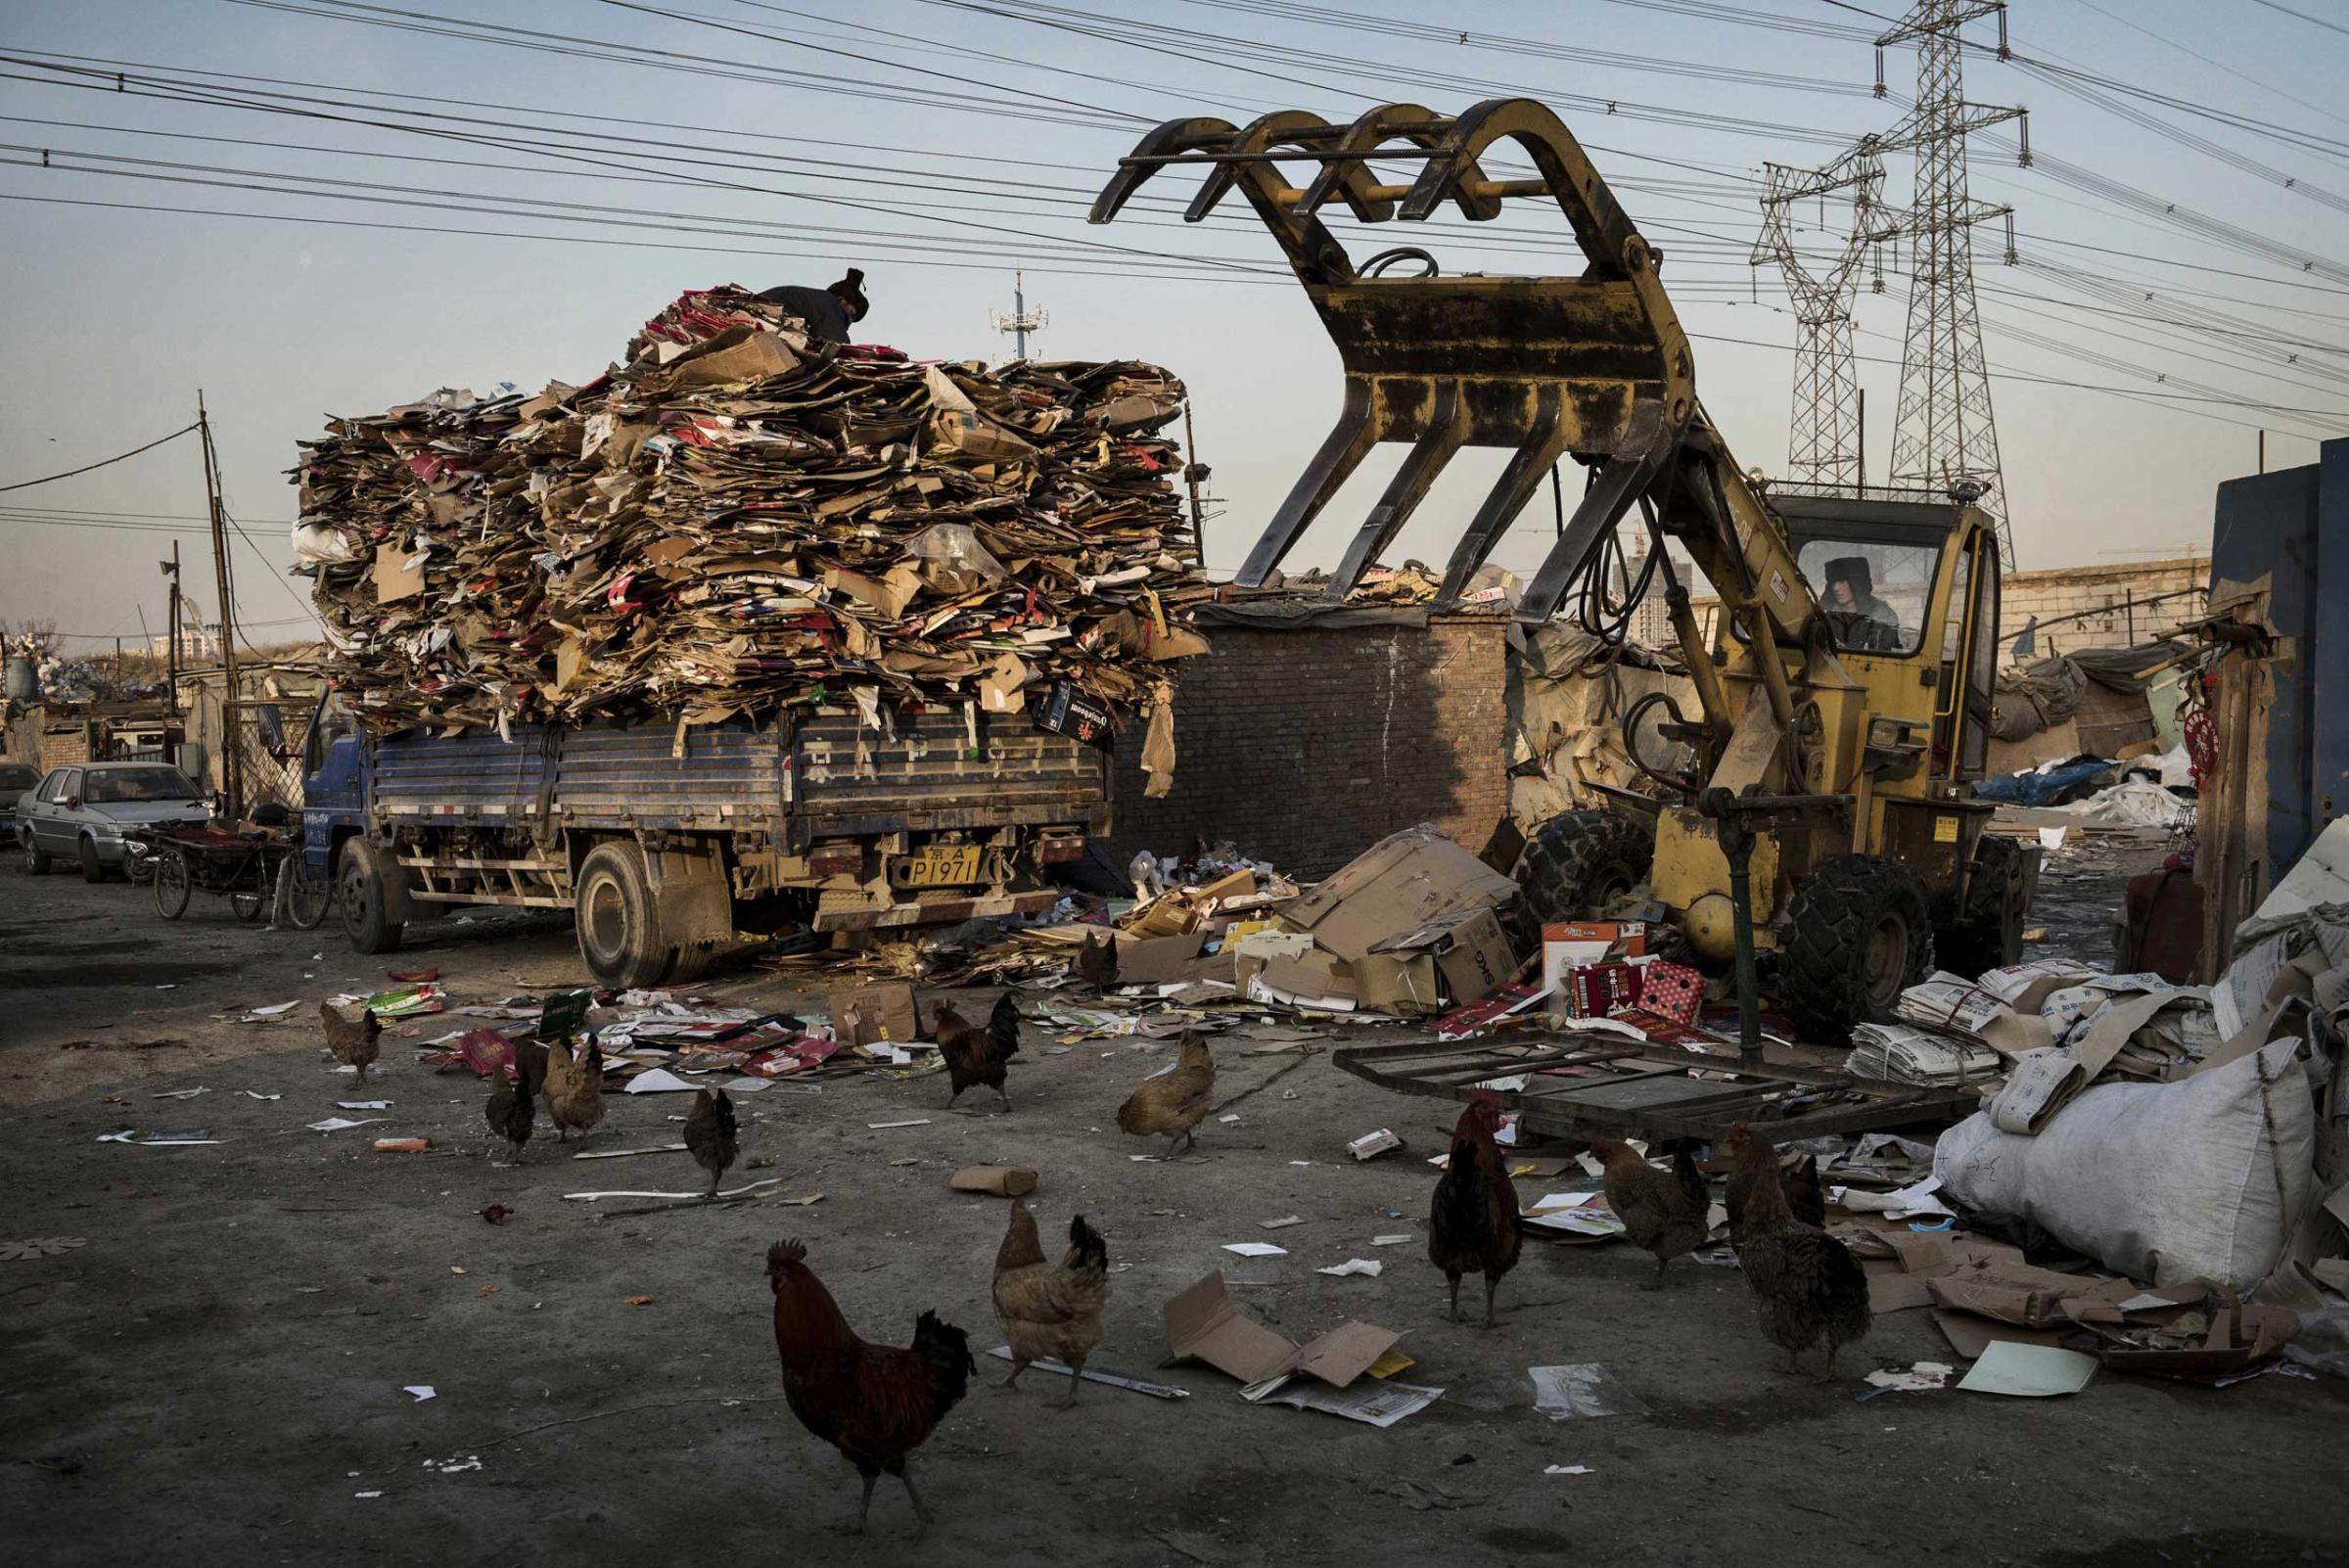 Migrant Community Within China's Capital Makes Livelihood Recycling City's Scrap